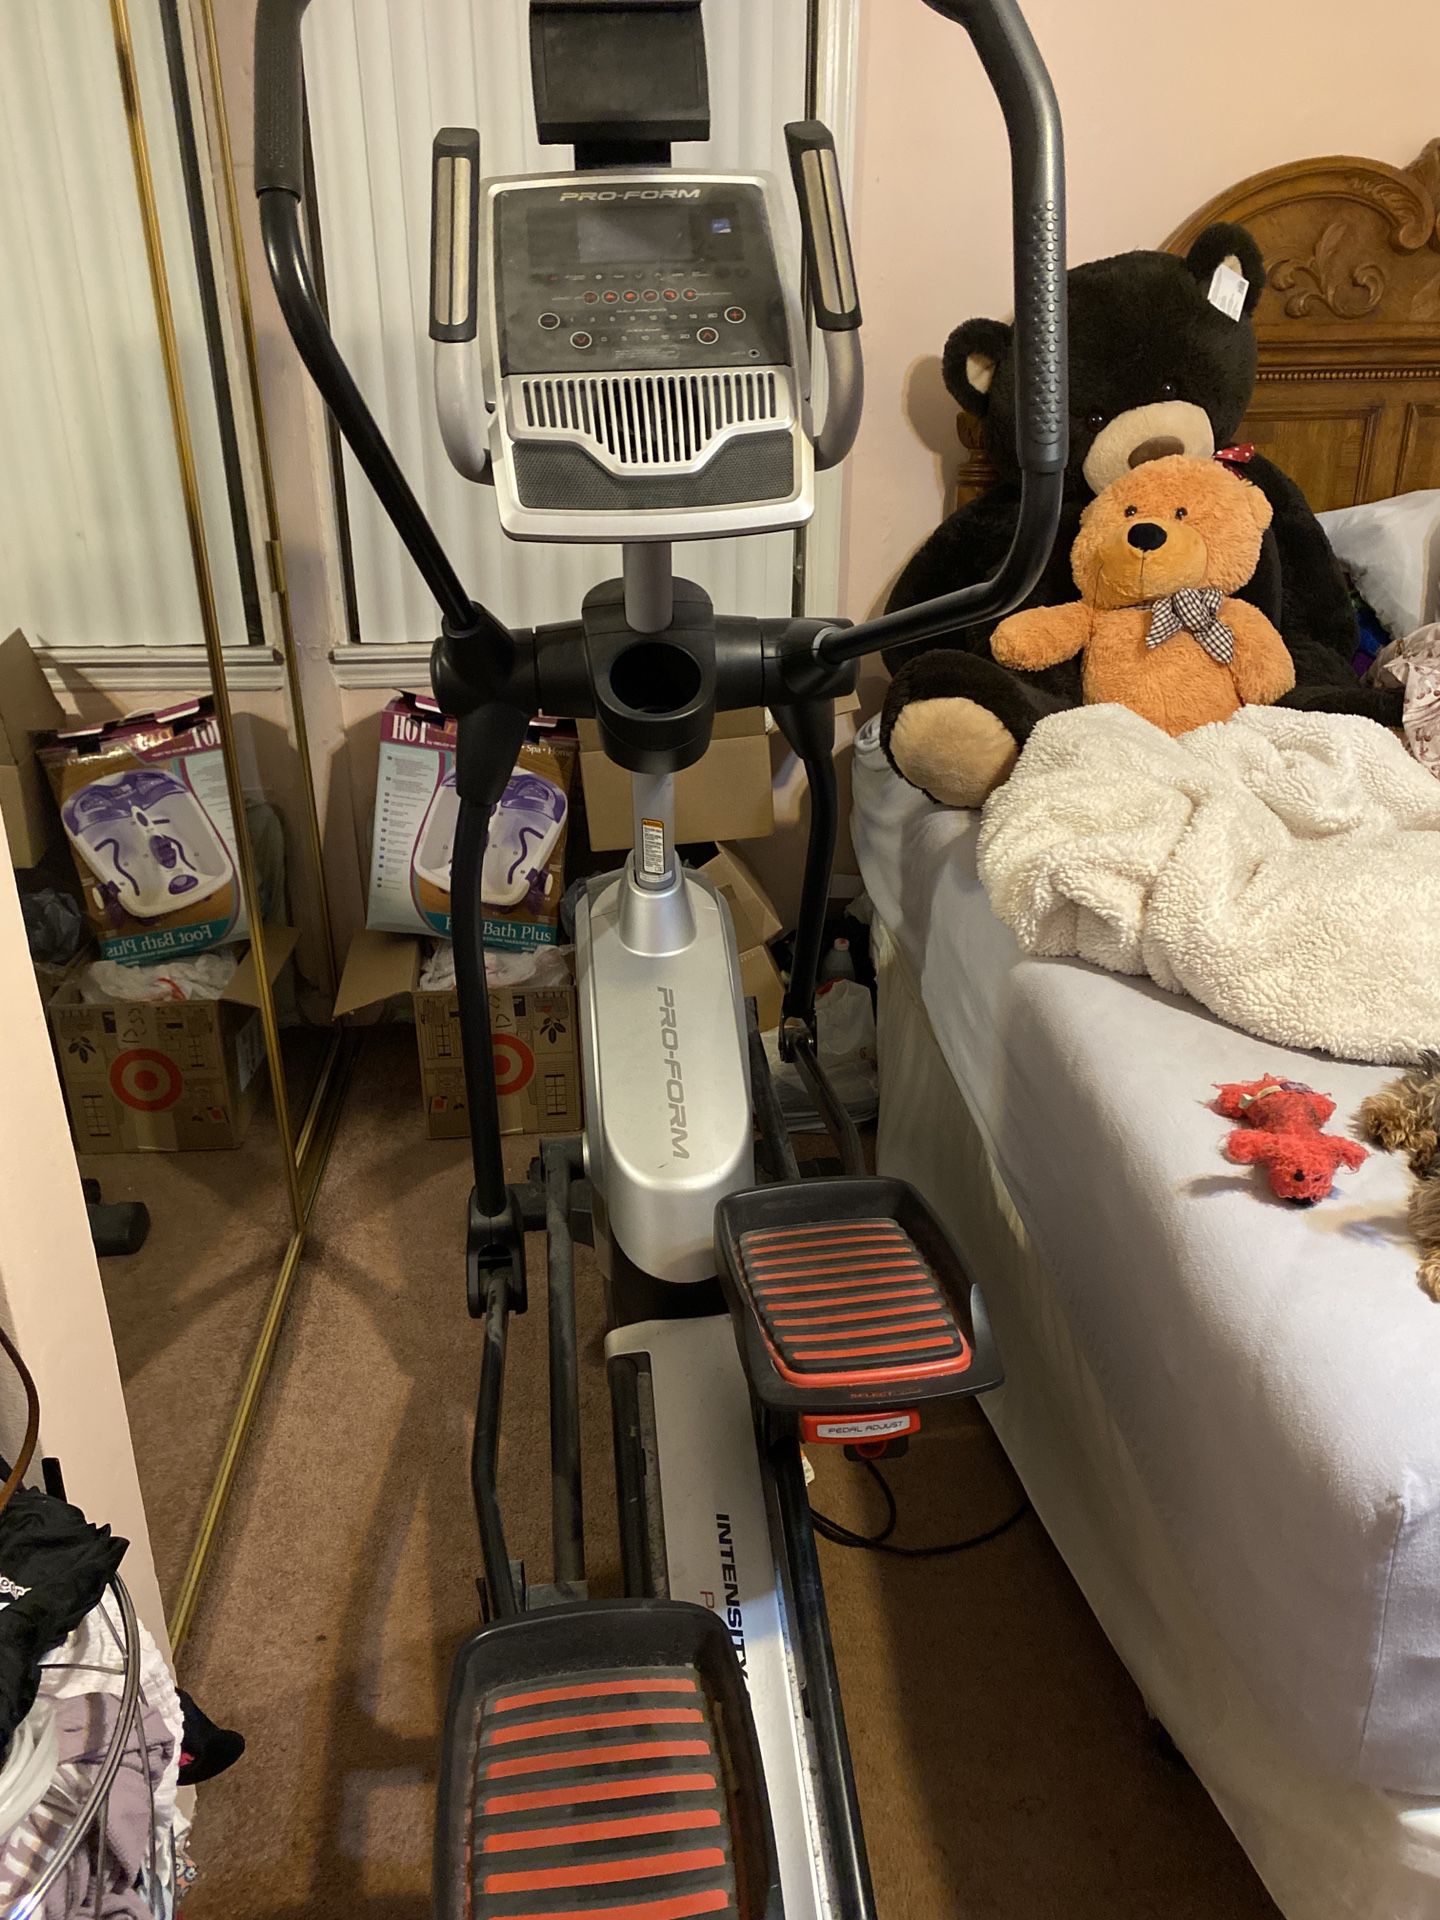 Great condition exercise machine